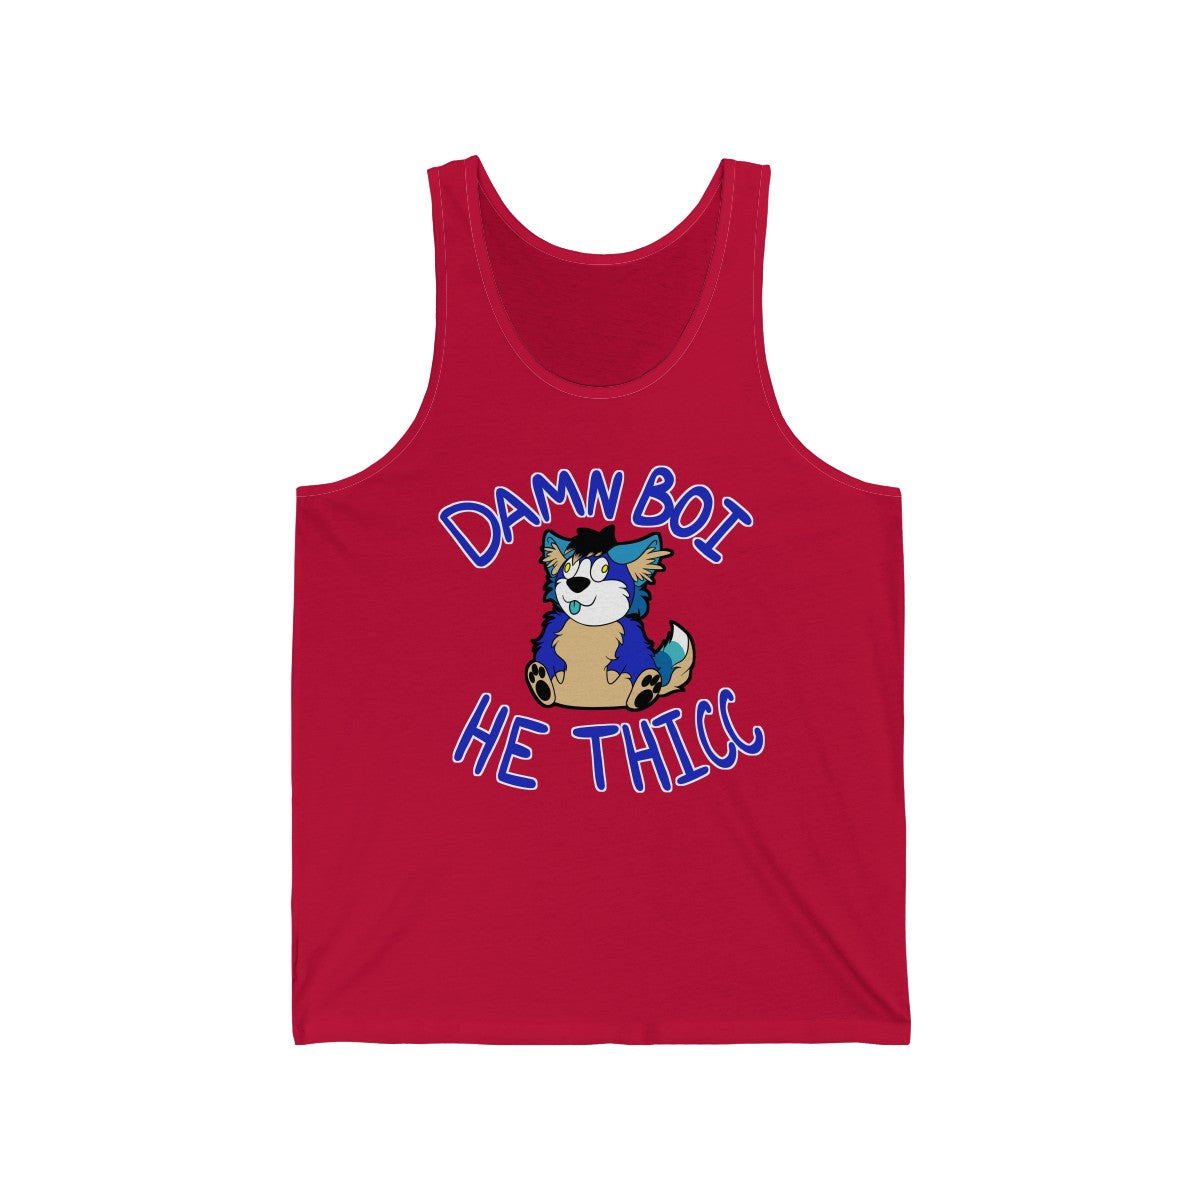 Thicc Boi With Text - Tank Top Tank Top AFLT-Hund The Hound Red XS 